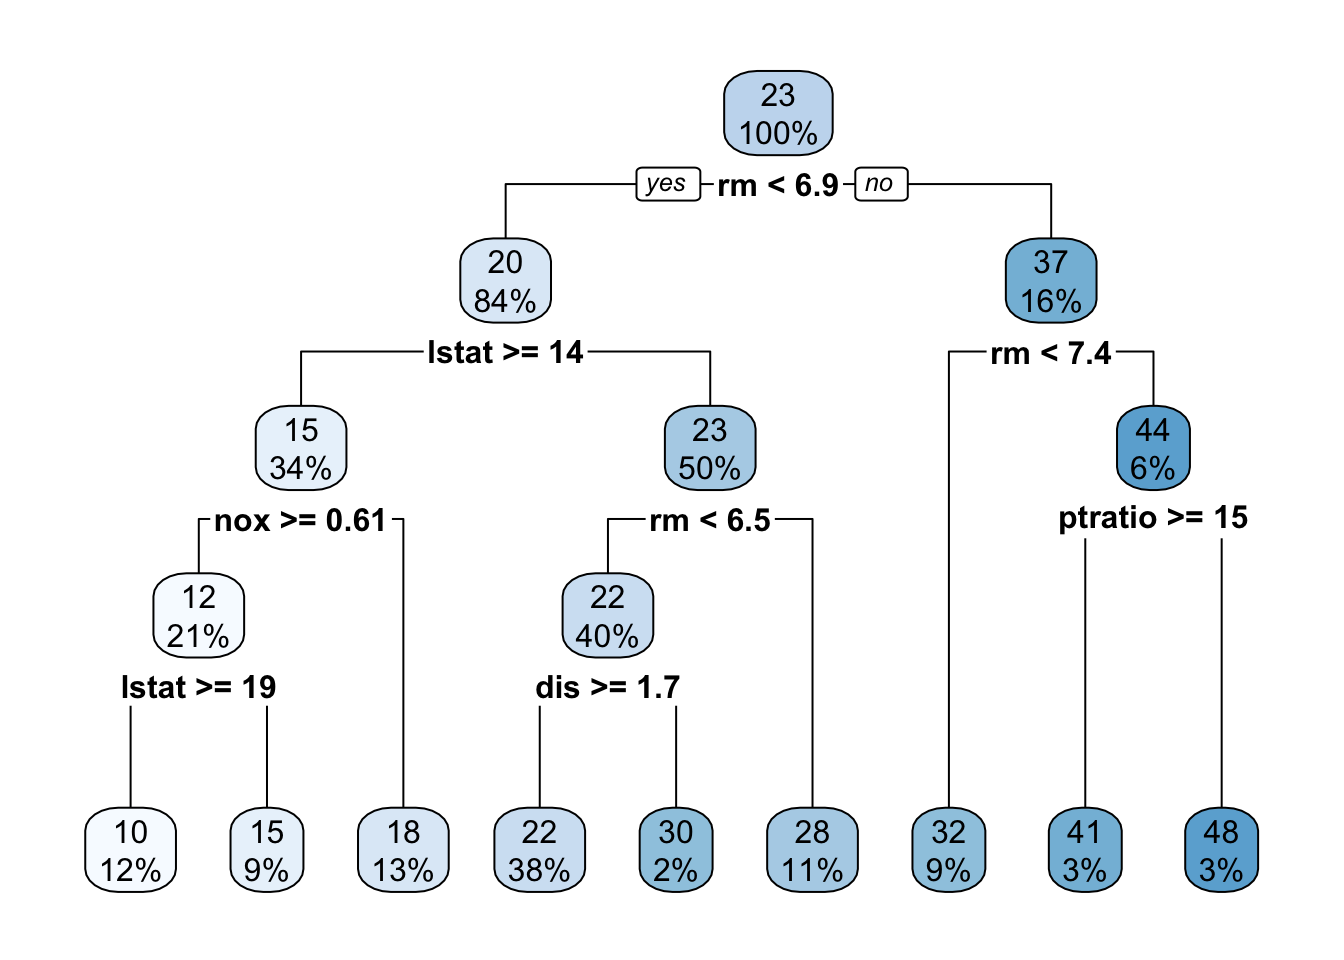 Decision tree chart. A total of 8 splits. Color is used to represent medv. Light blue colors represent small values, dark blue represent high values.